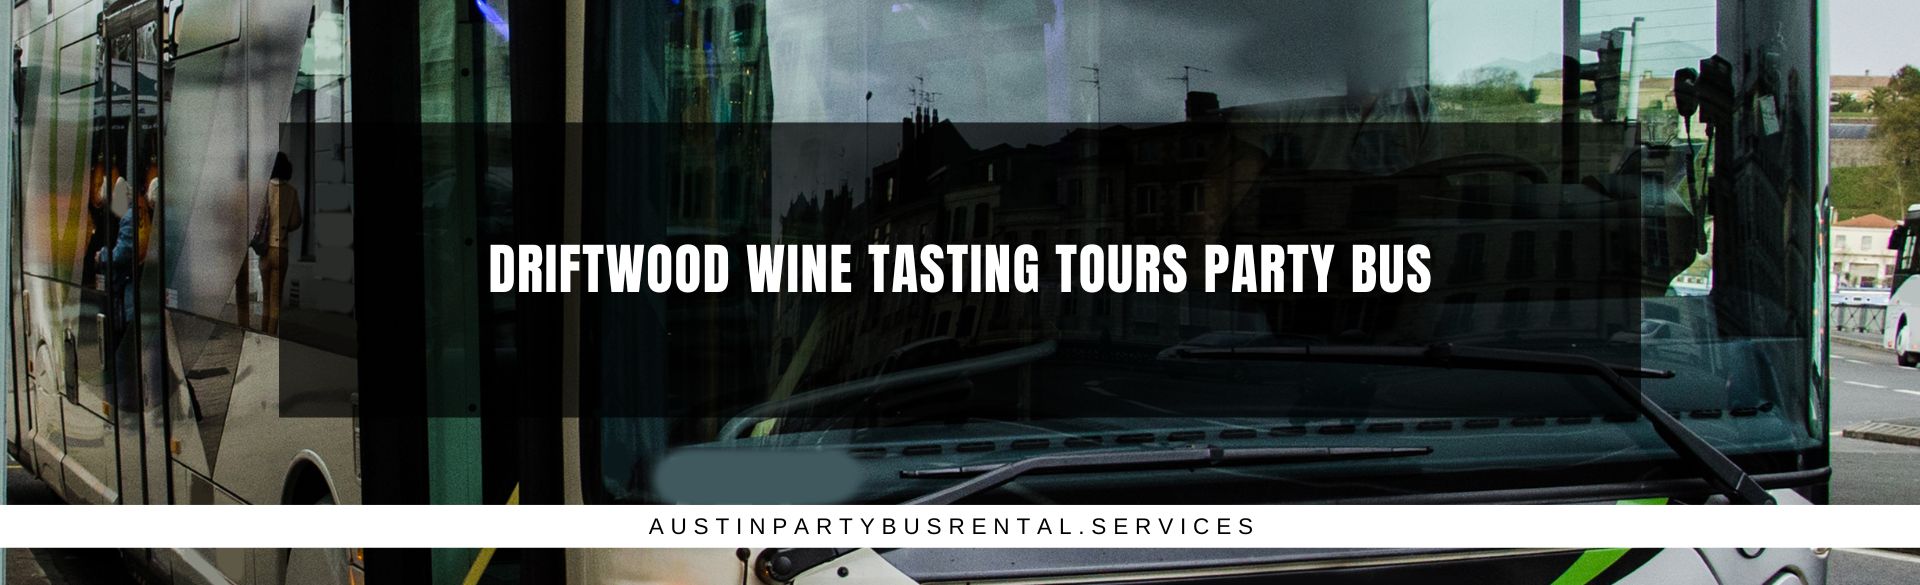 Driftwood Wine Tasting Tours Party Bus